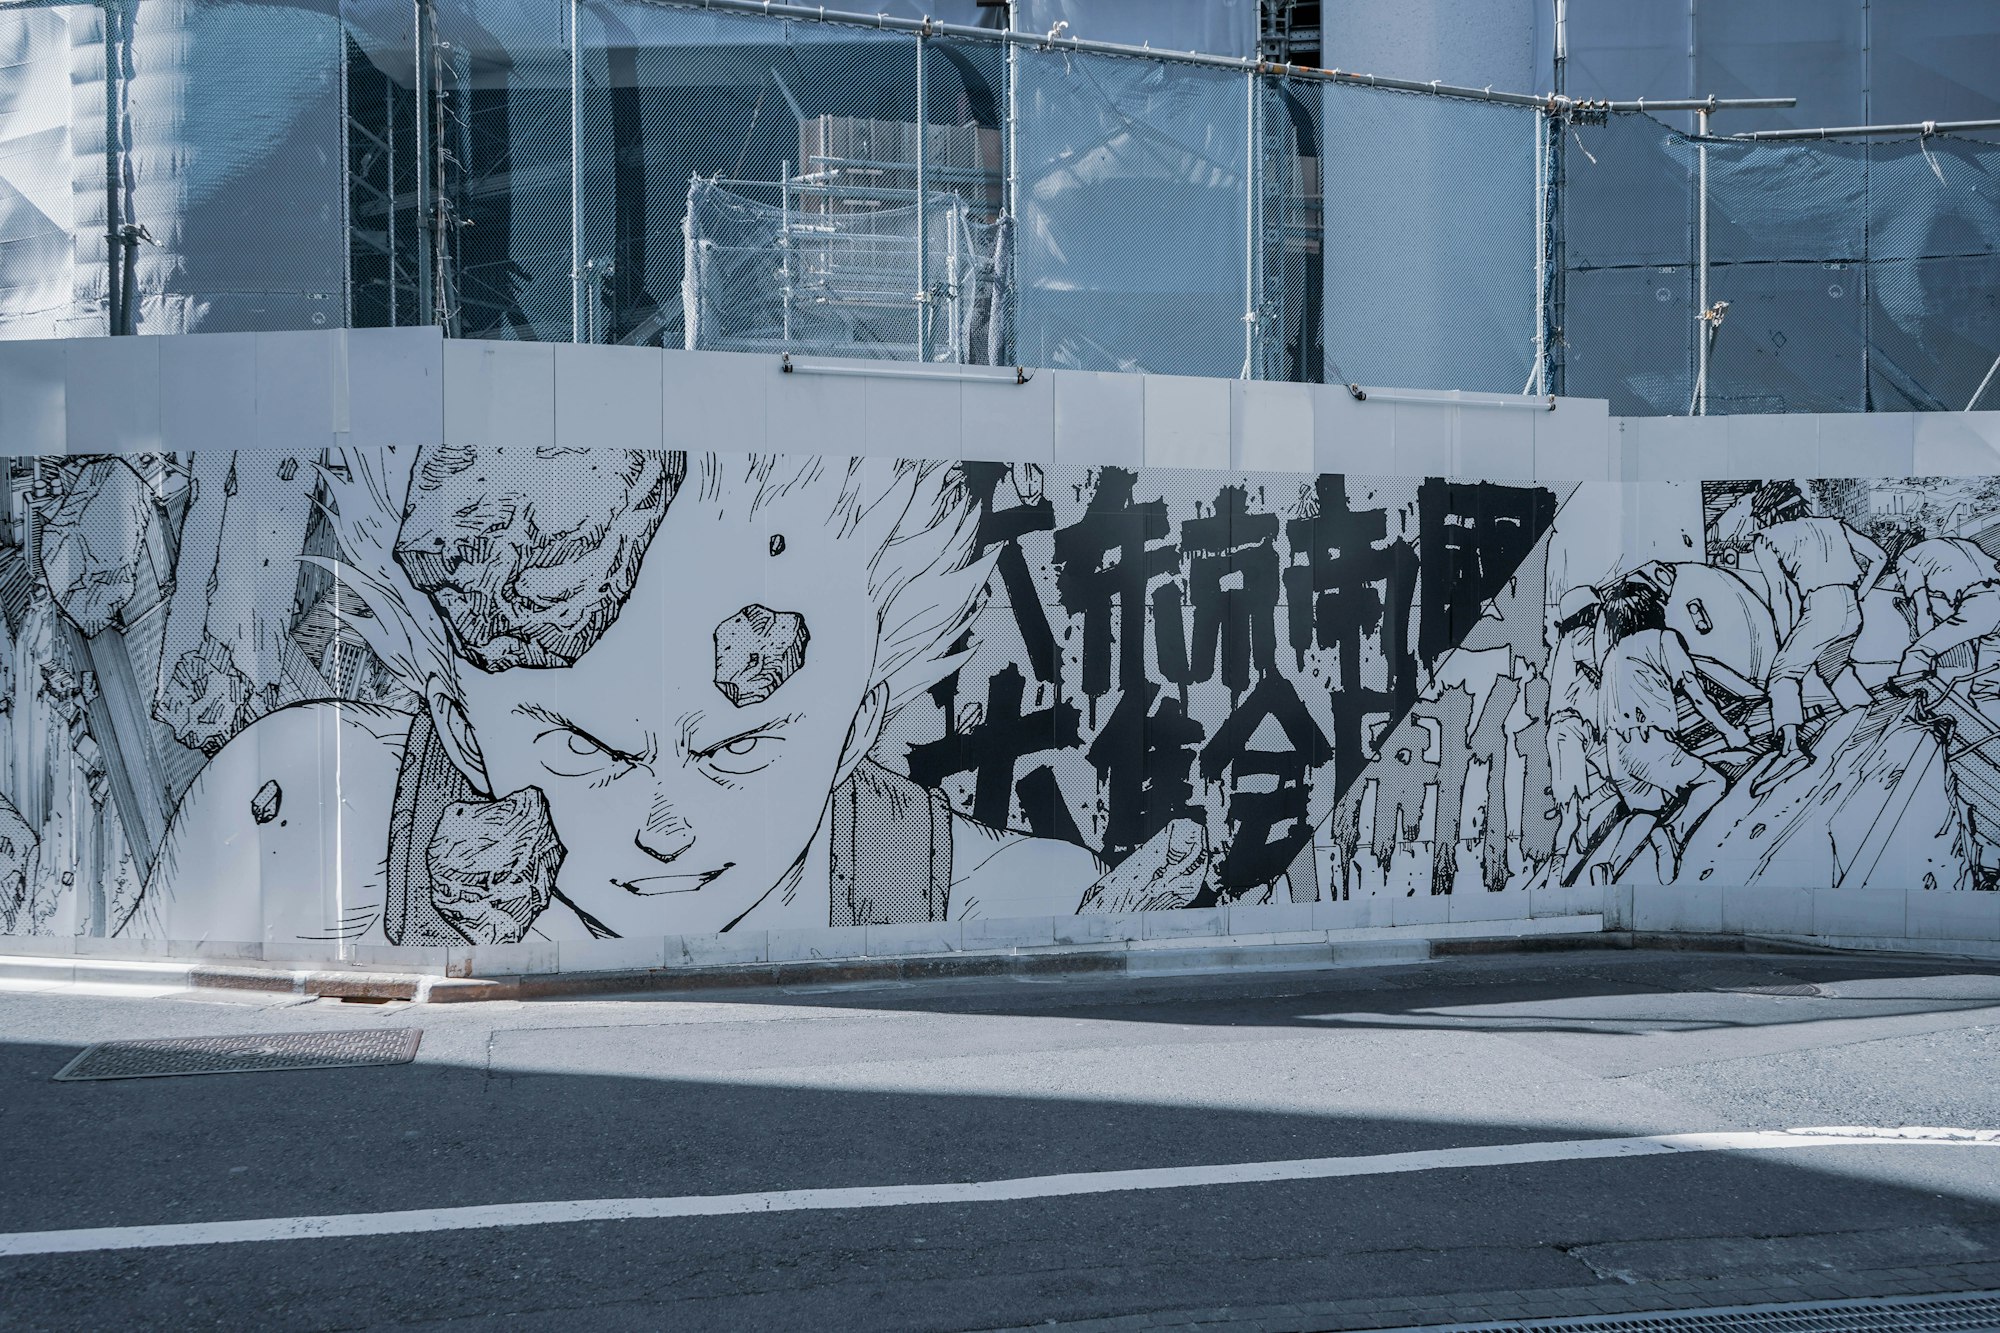 anime art done on the wall in japan